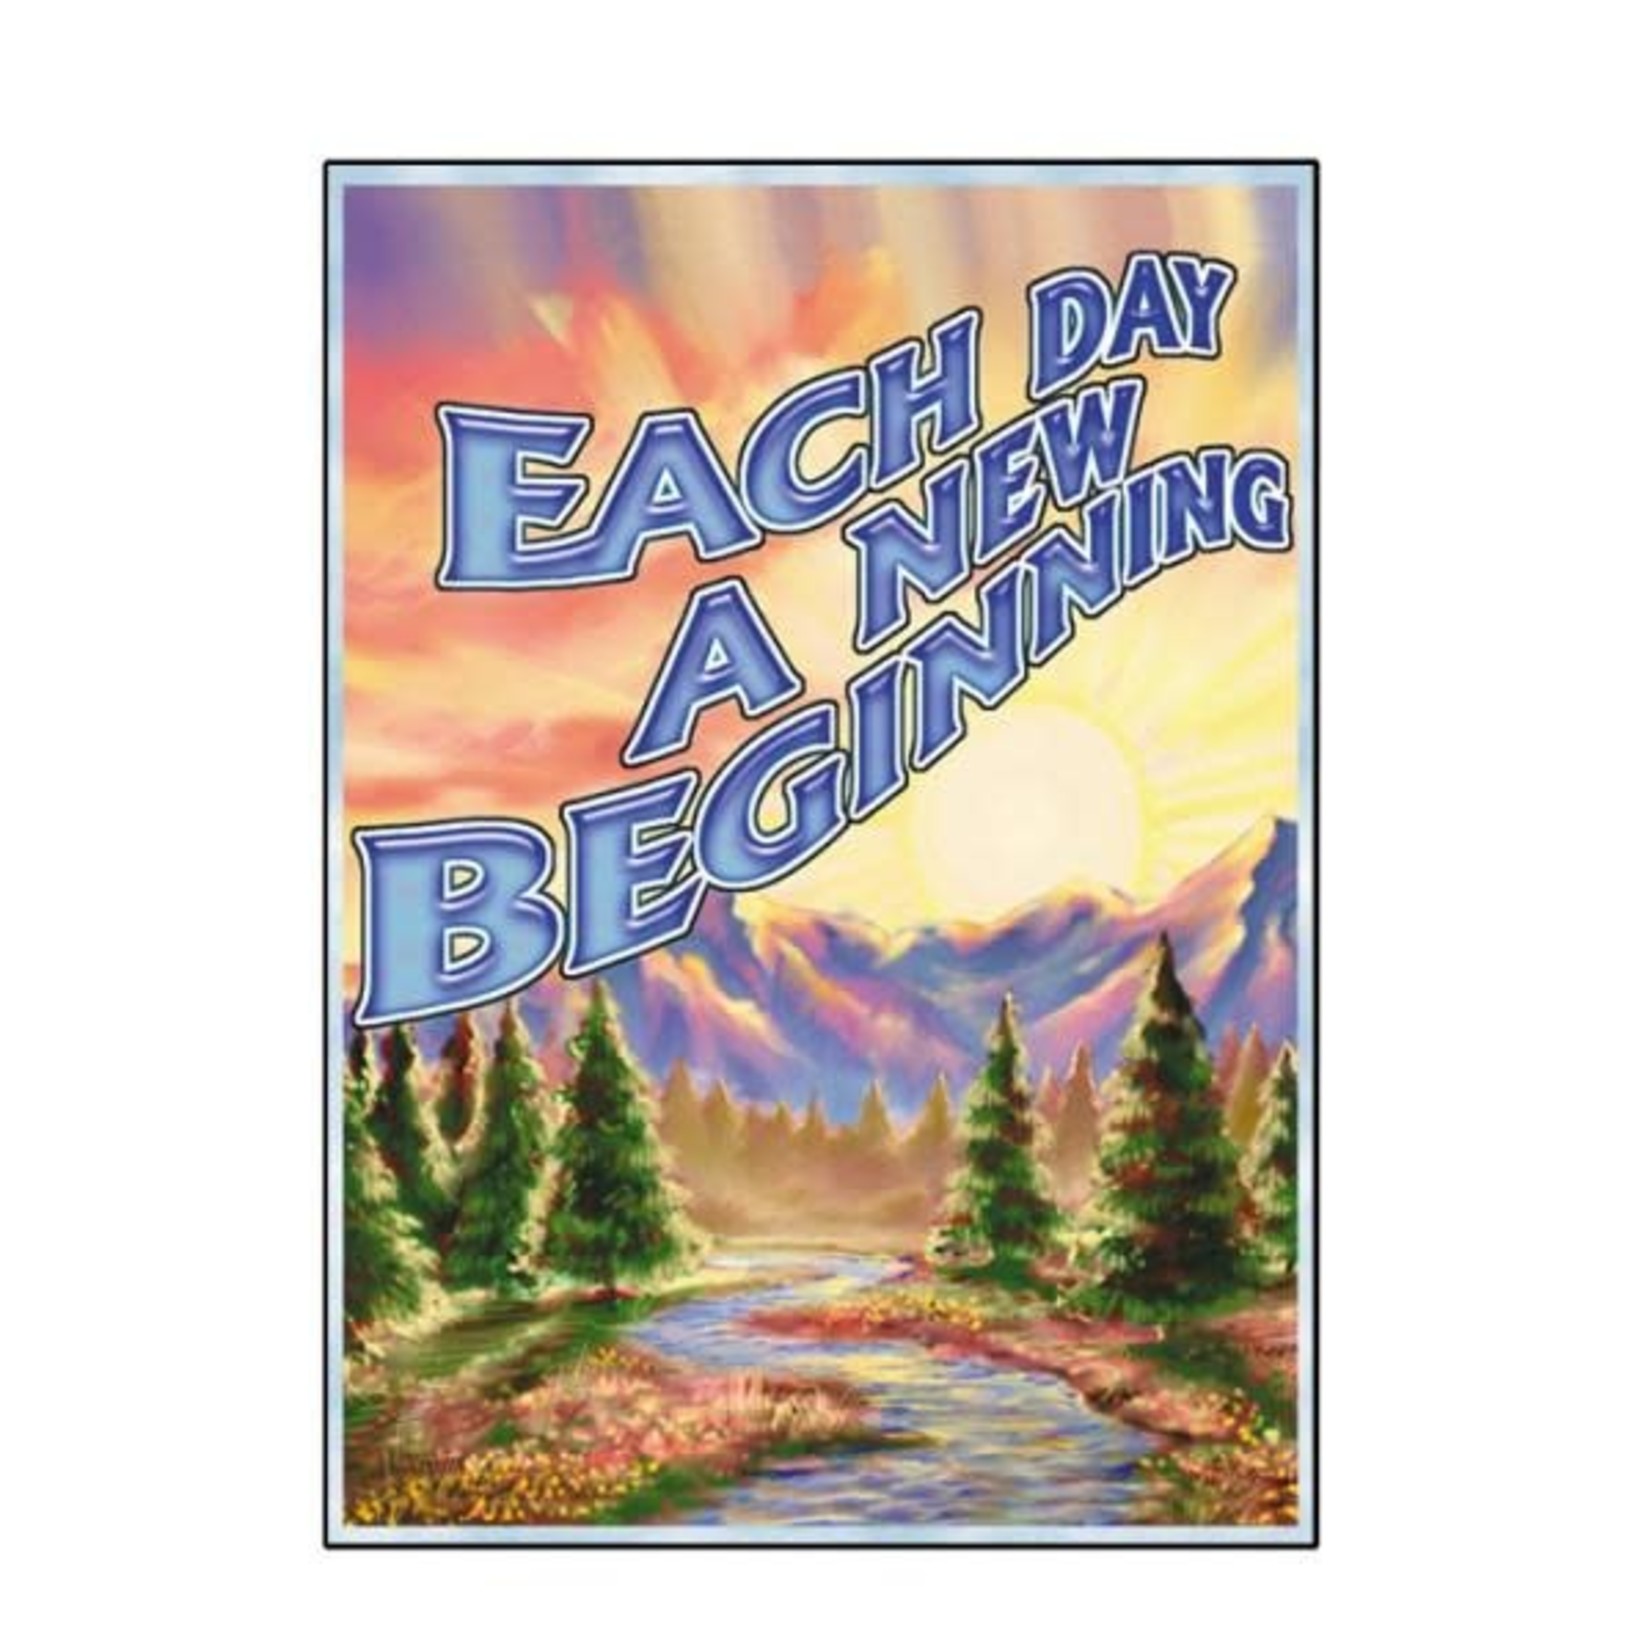 Greeting Card [Each Day New Beginning]